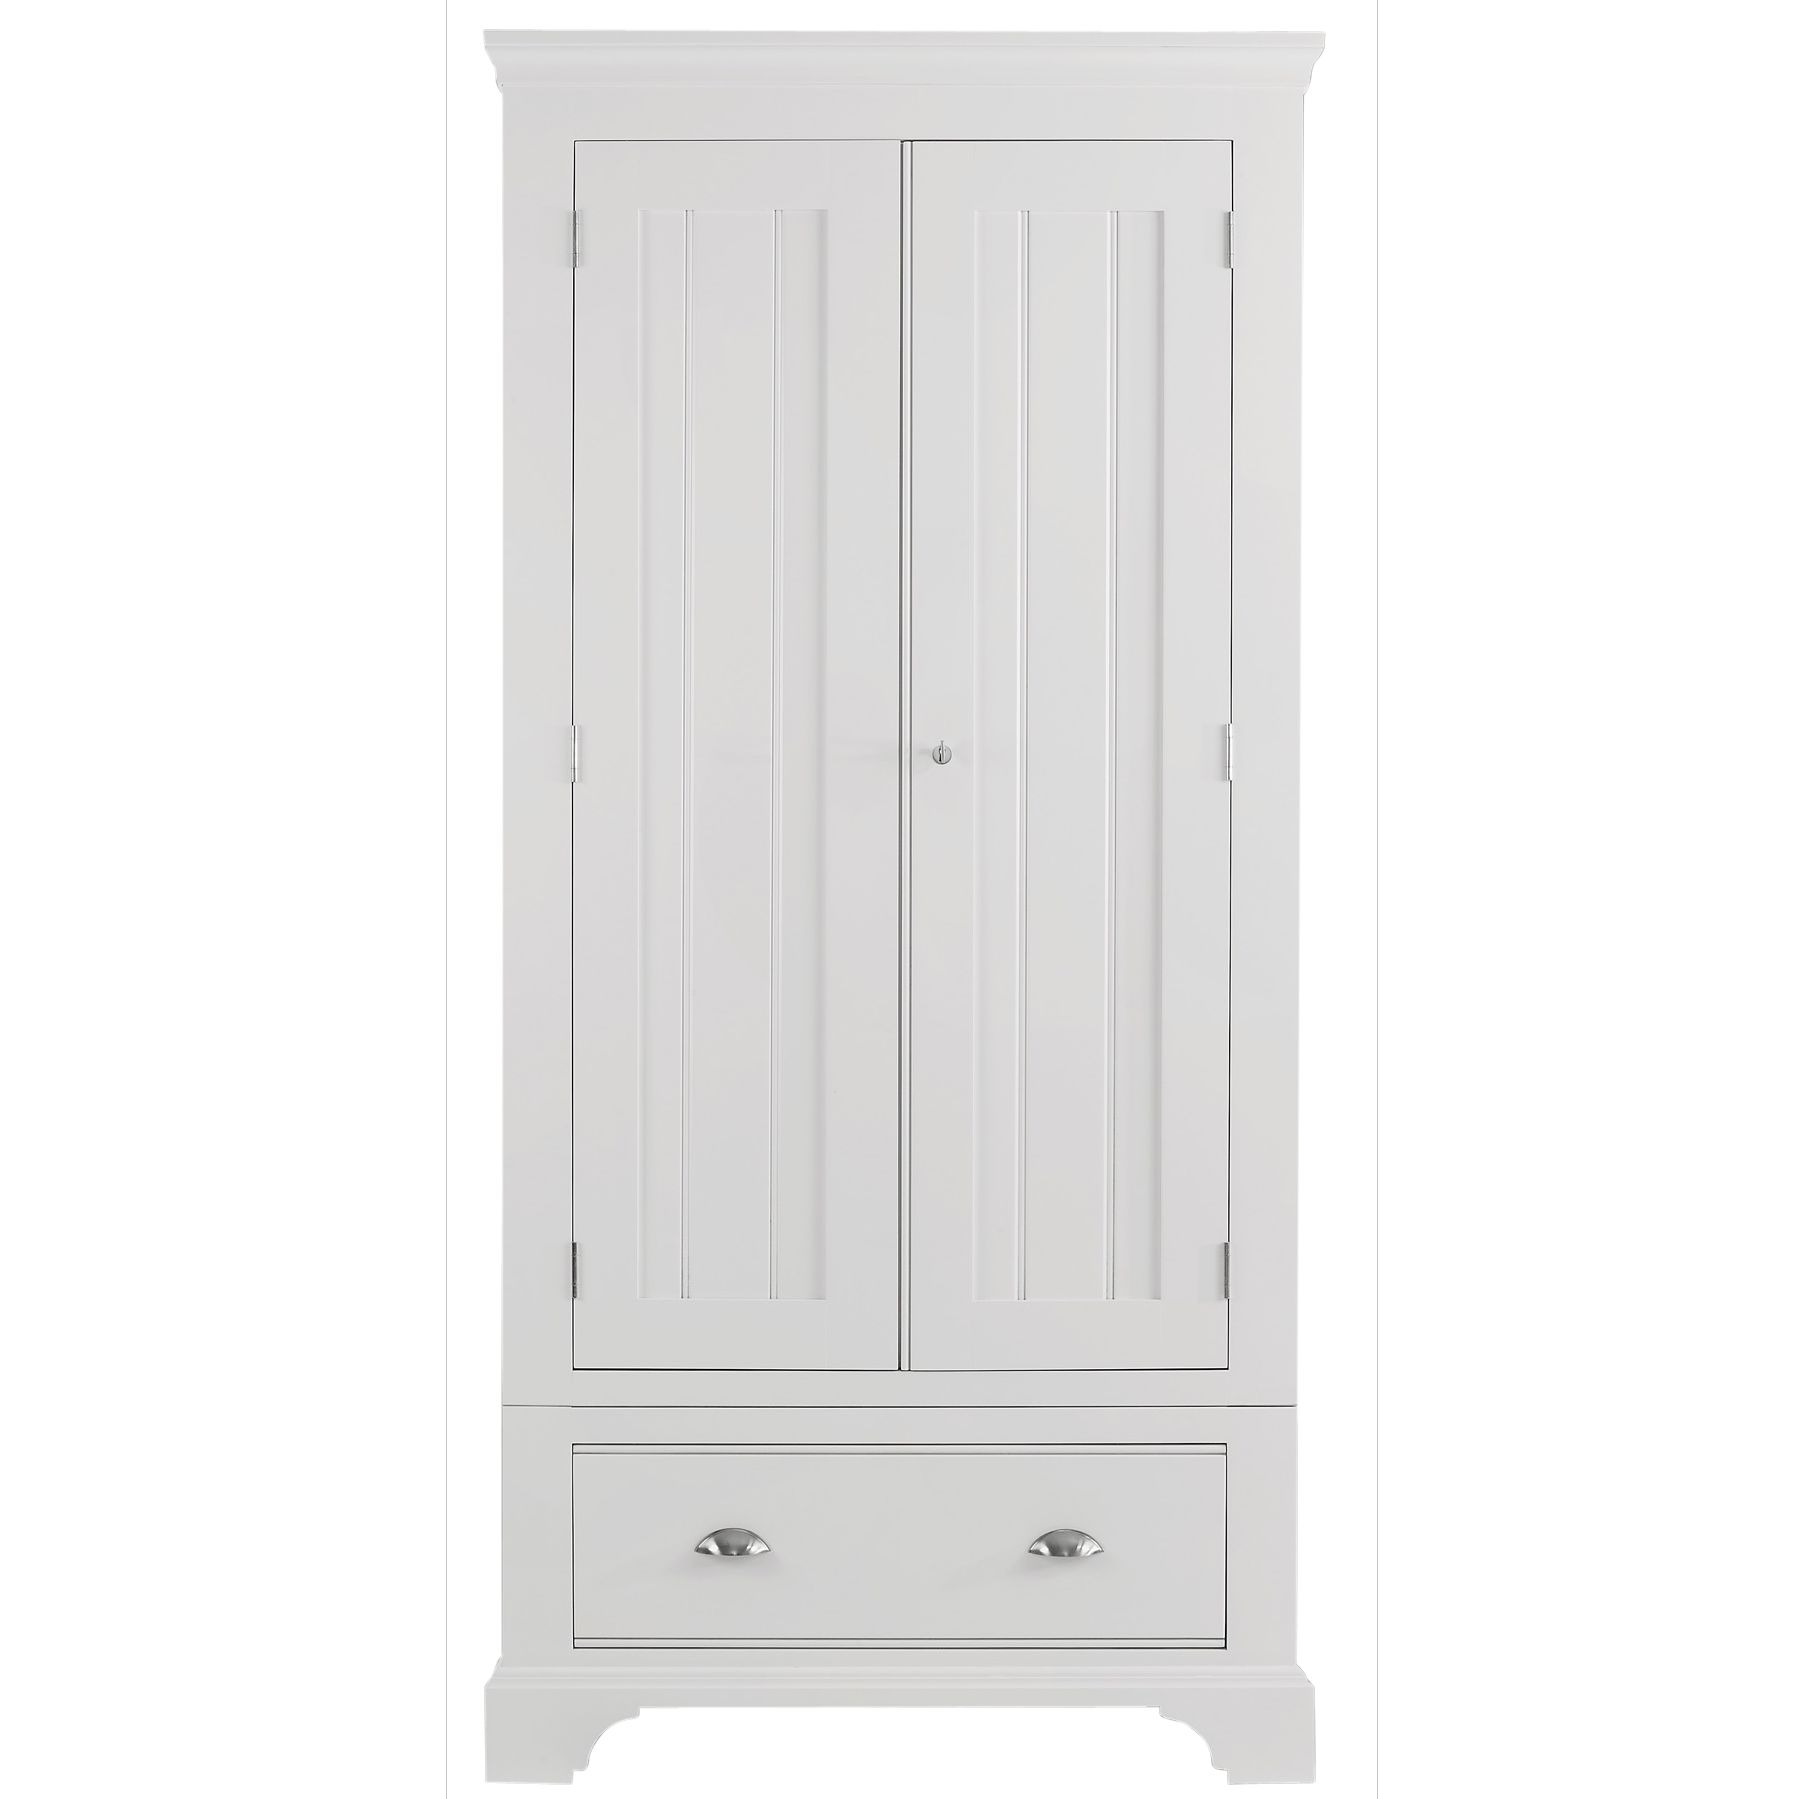 john lewis fitted wardrobes